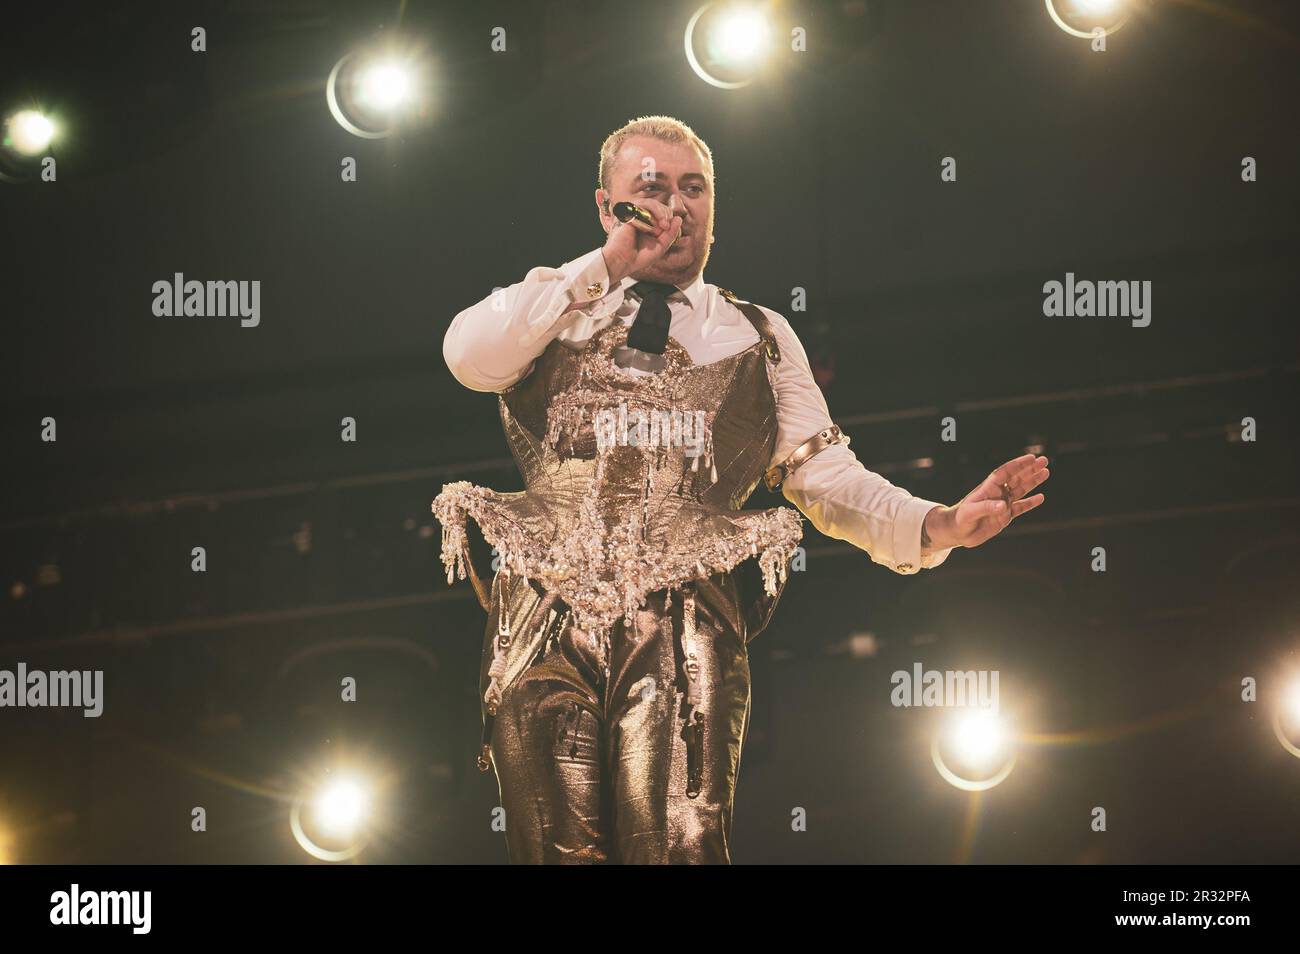 TURIN, ITALY: The British singer and songwriter Sam Smith performing live on stage in Turin during the Italian leg of the “ Gloria Tour ” 2023 Stock Photo